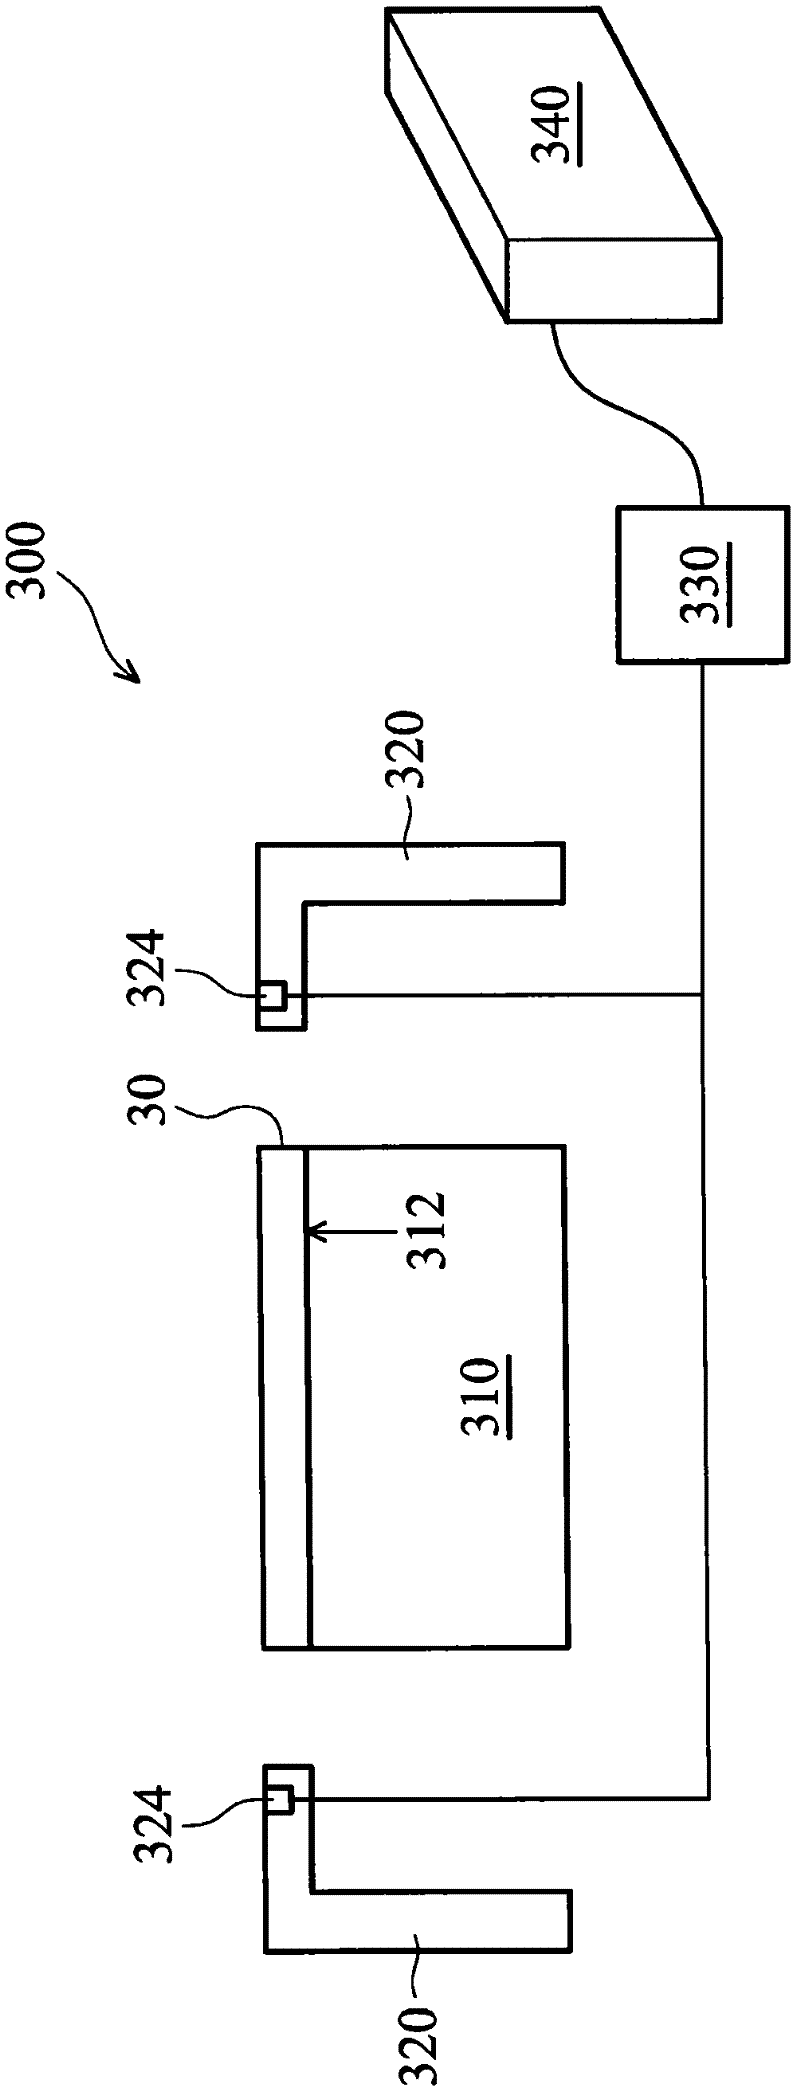 Semiconductor process processing system and method